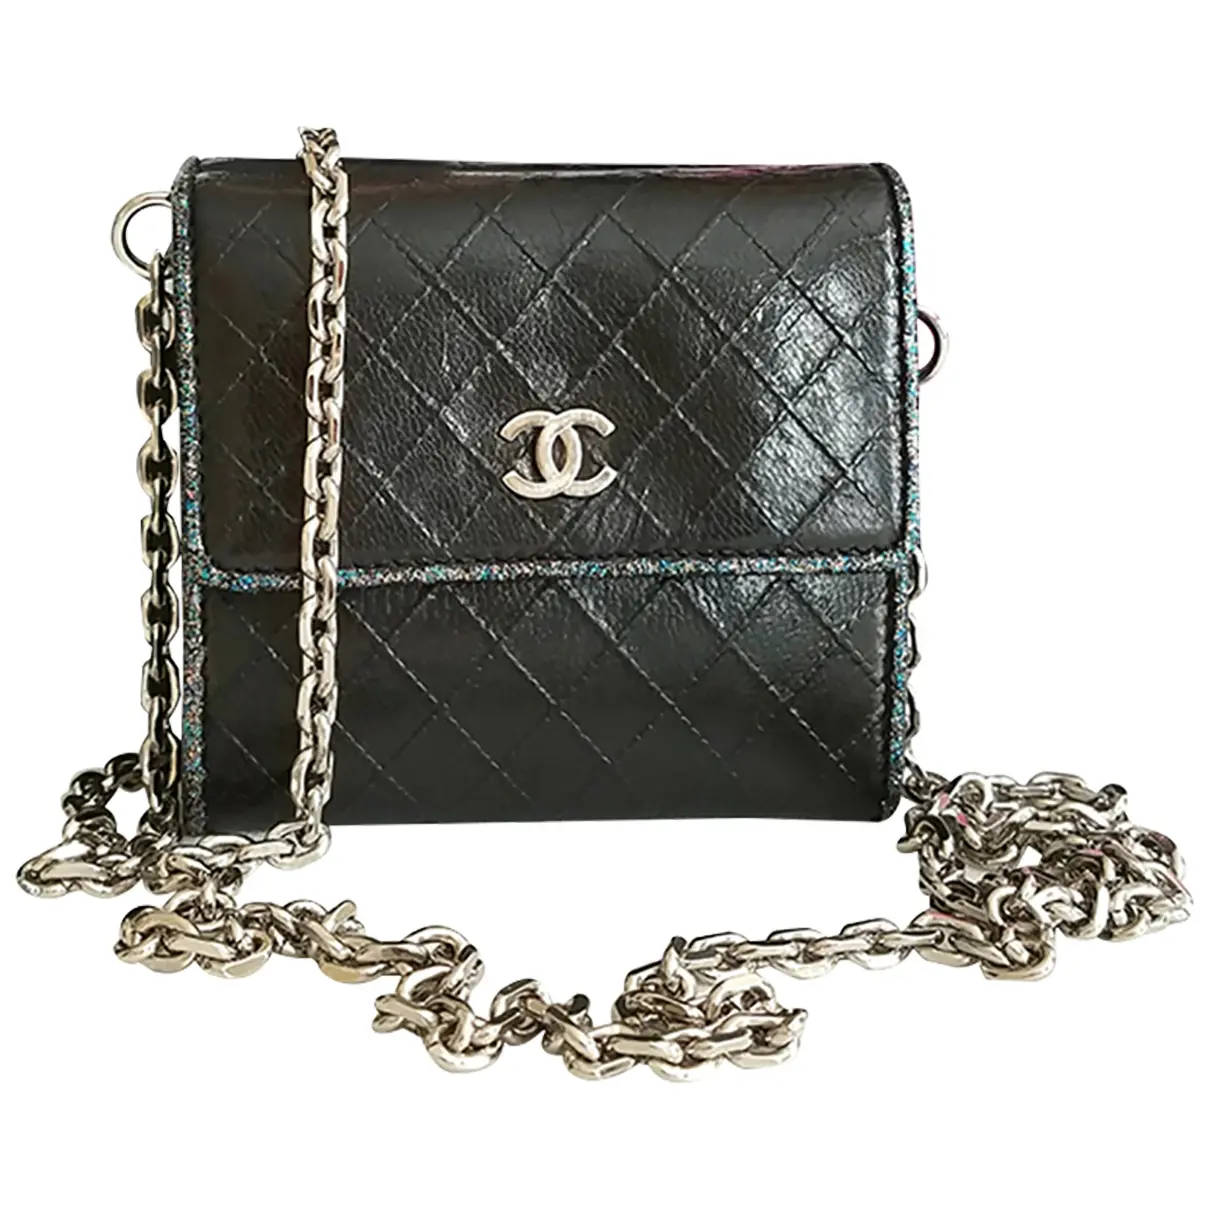 Wallet on Chain leather crossbody bag Chanel - Vintage